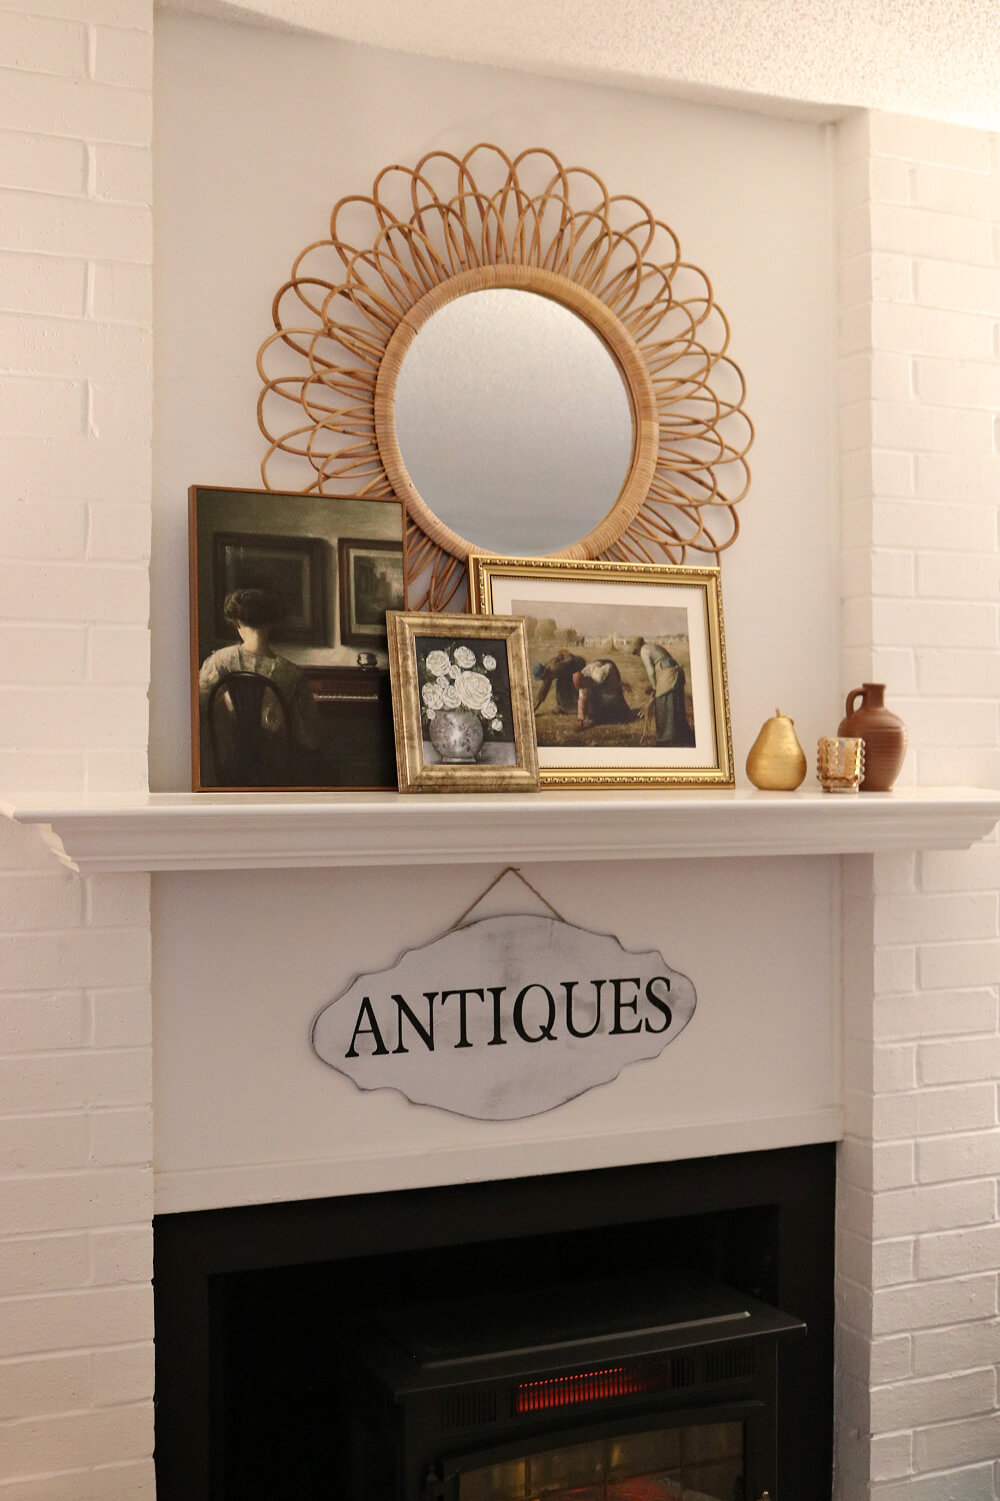 My mirror is centered on the wall above the fireplace and the paintings for the January fireplace mantel are below it.